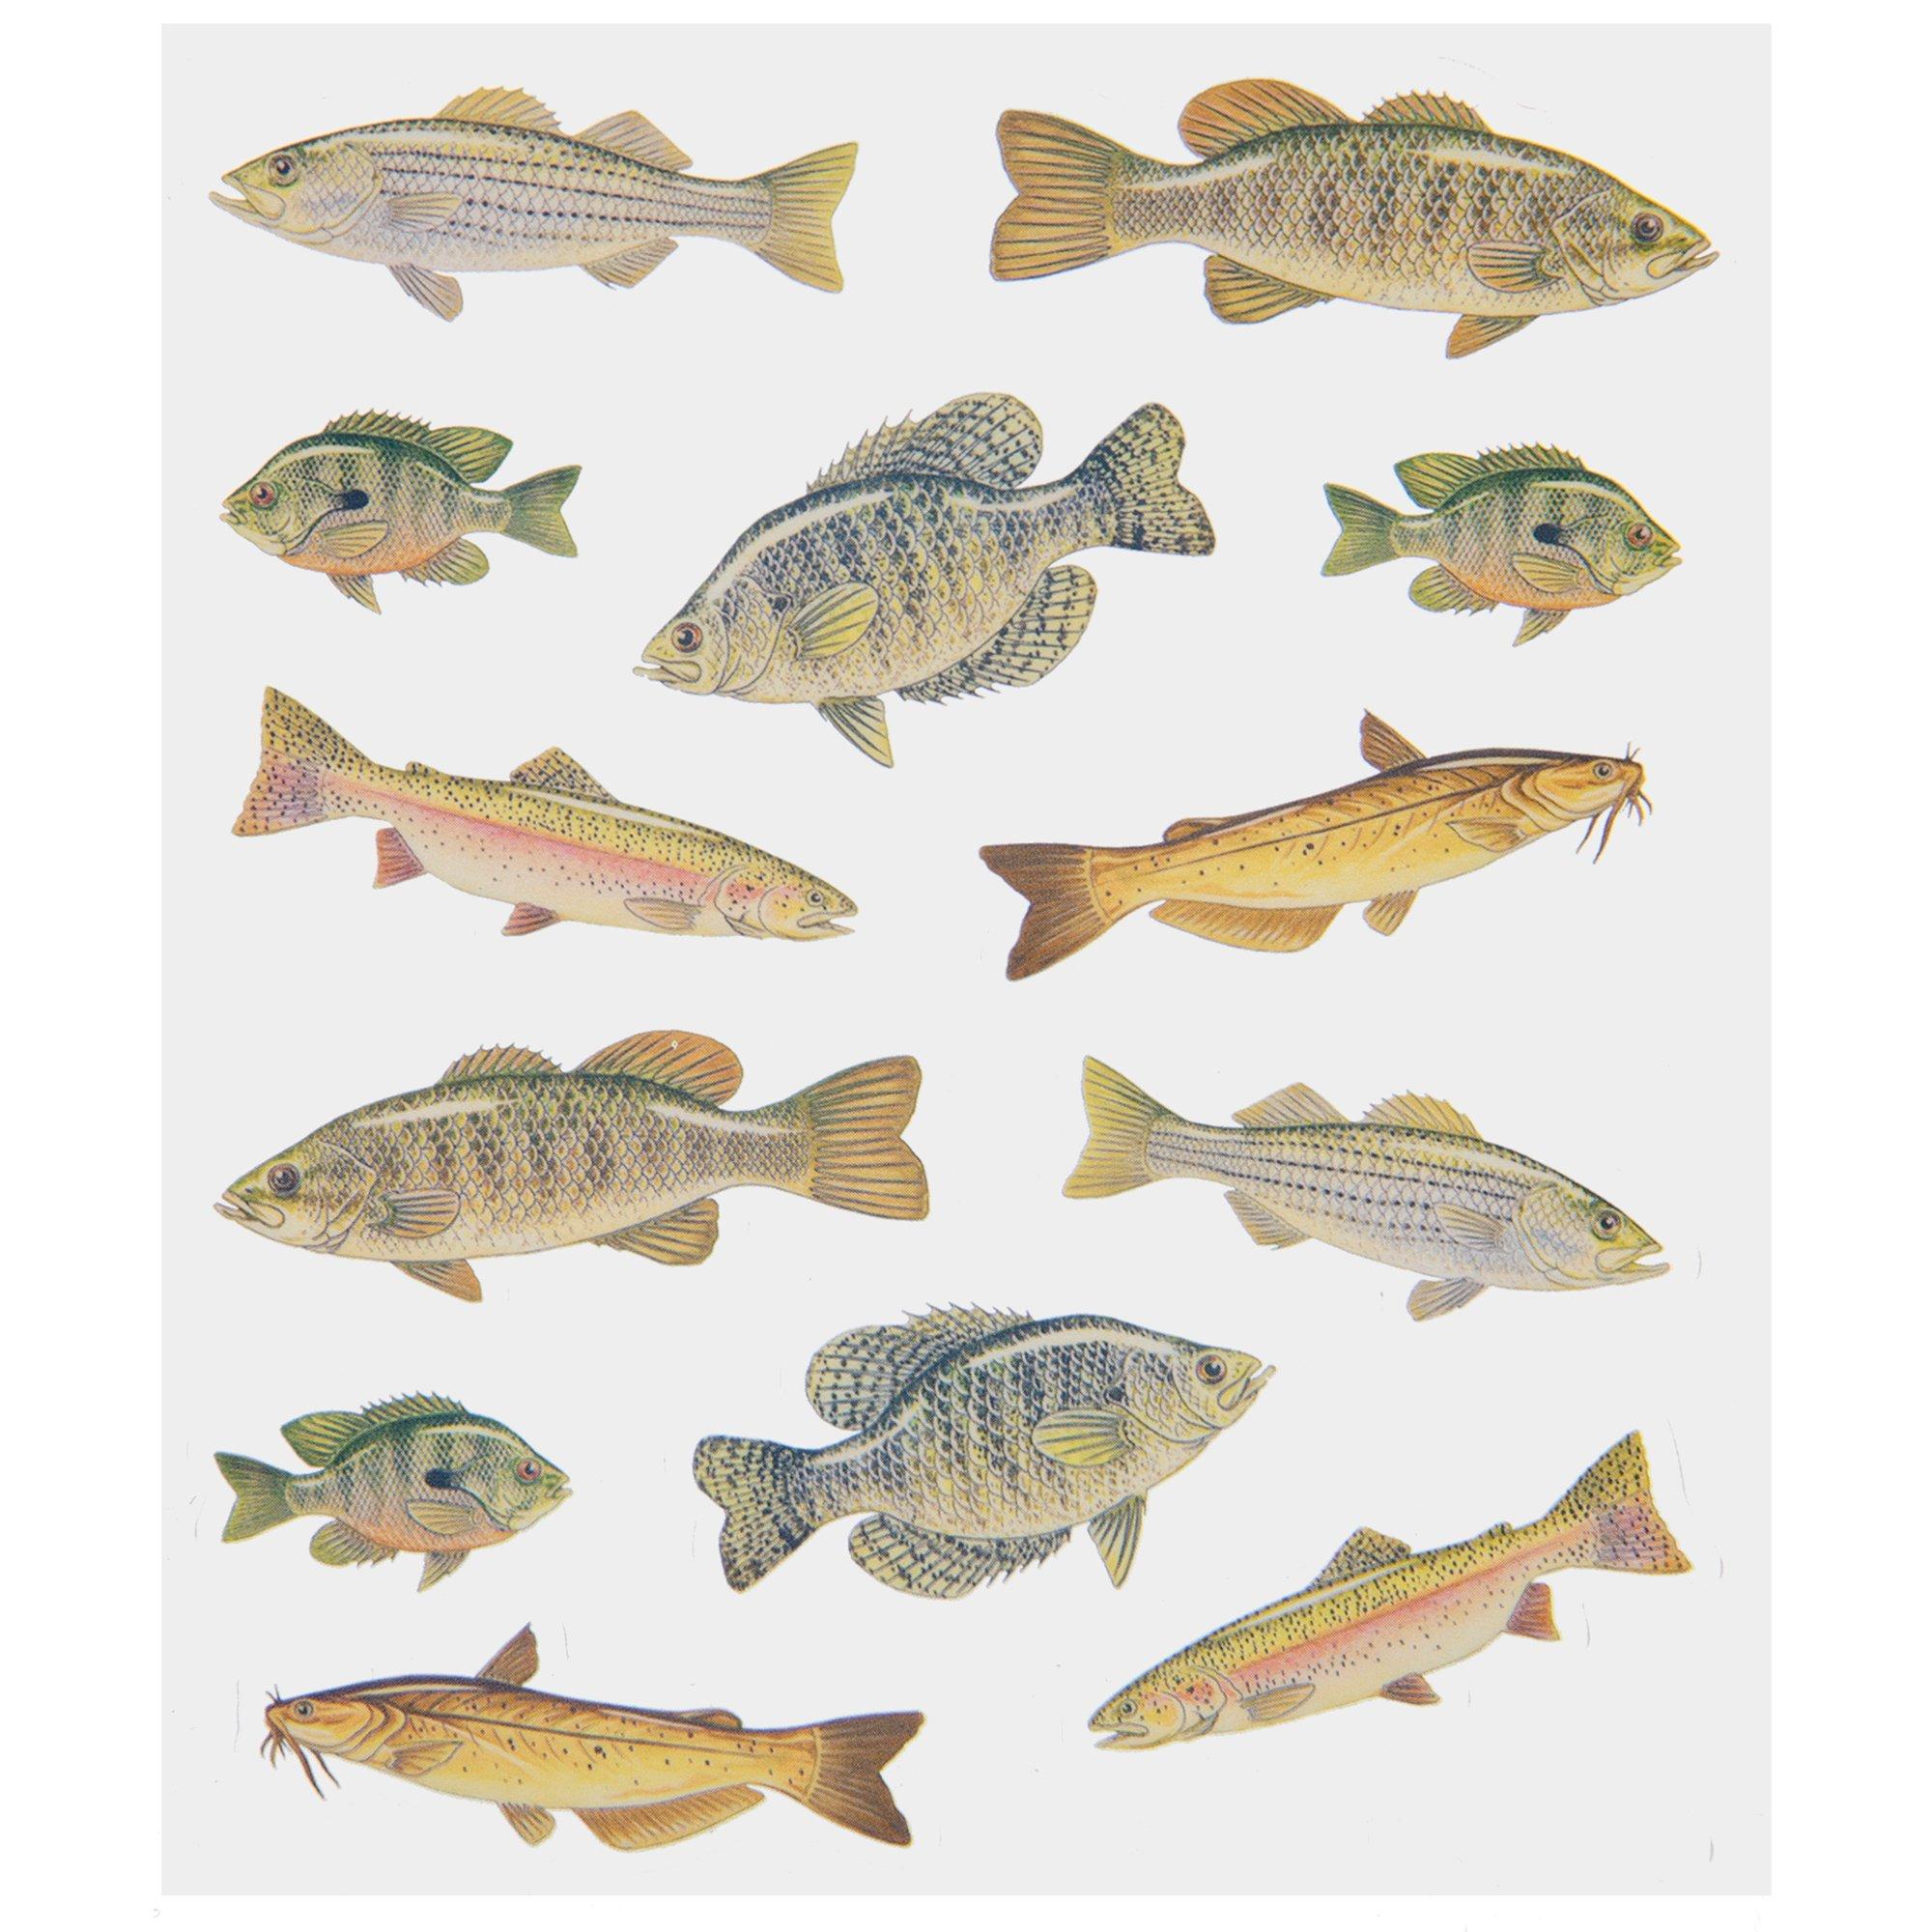 Fish On Fishing Pole Collage Frame, Hobby Lobby